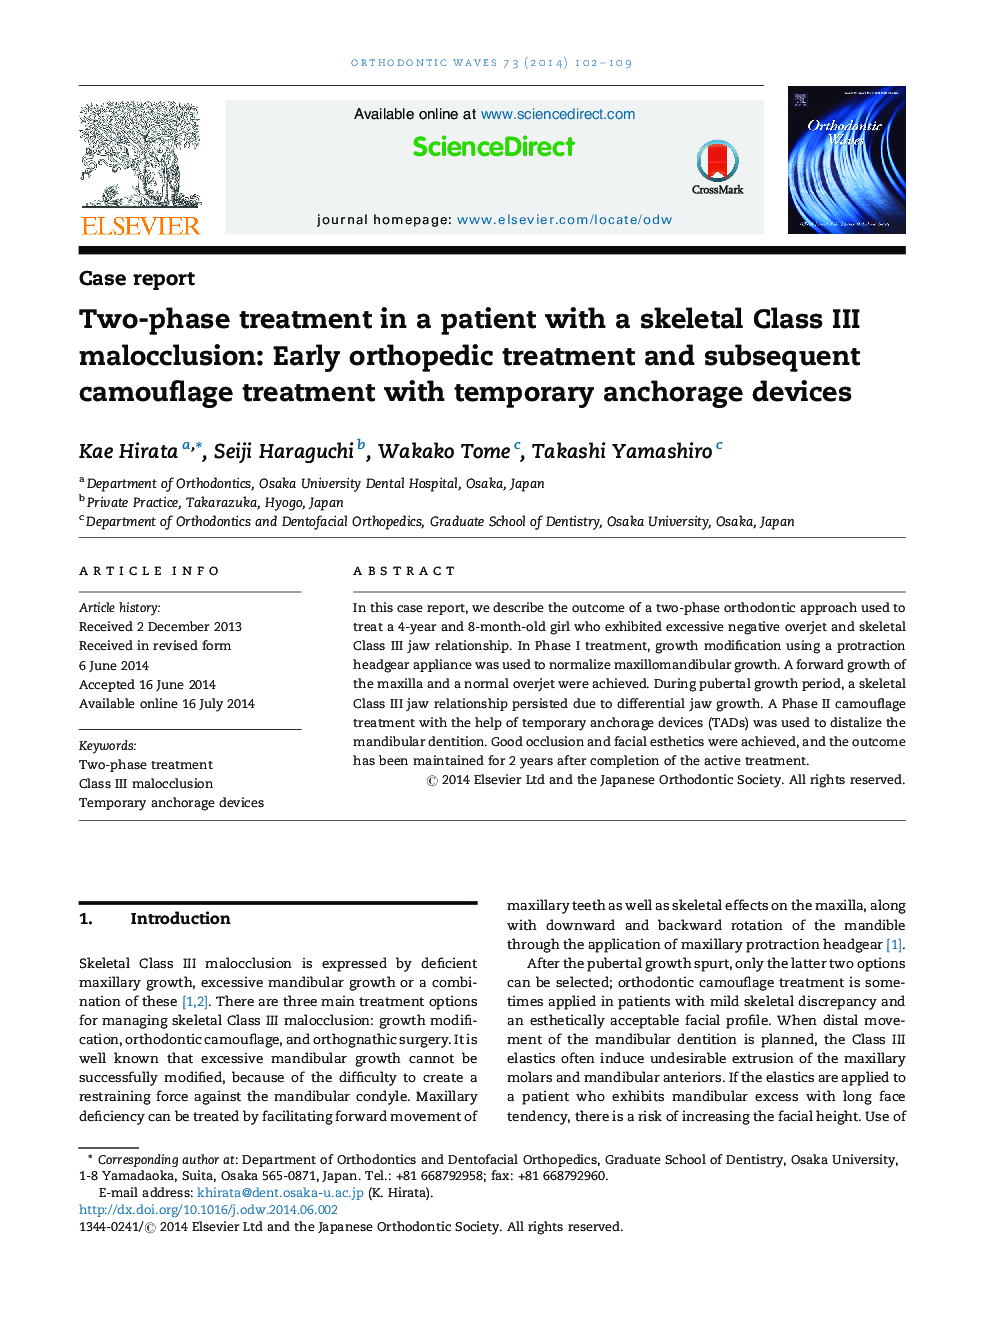 Two-phase treatment in a patient with a skeletal Class III malocclusion: Early orthopedic treatment and subsequent camouflage treatment with temporary anchorage devices